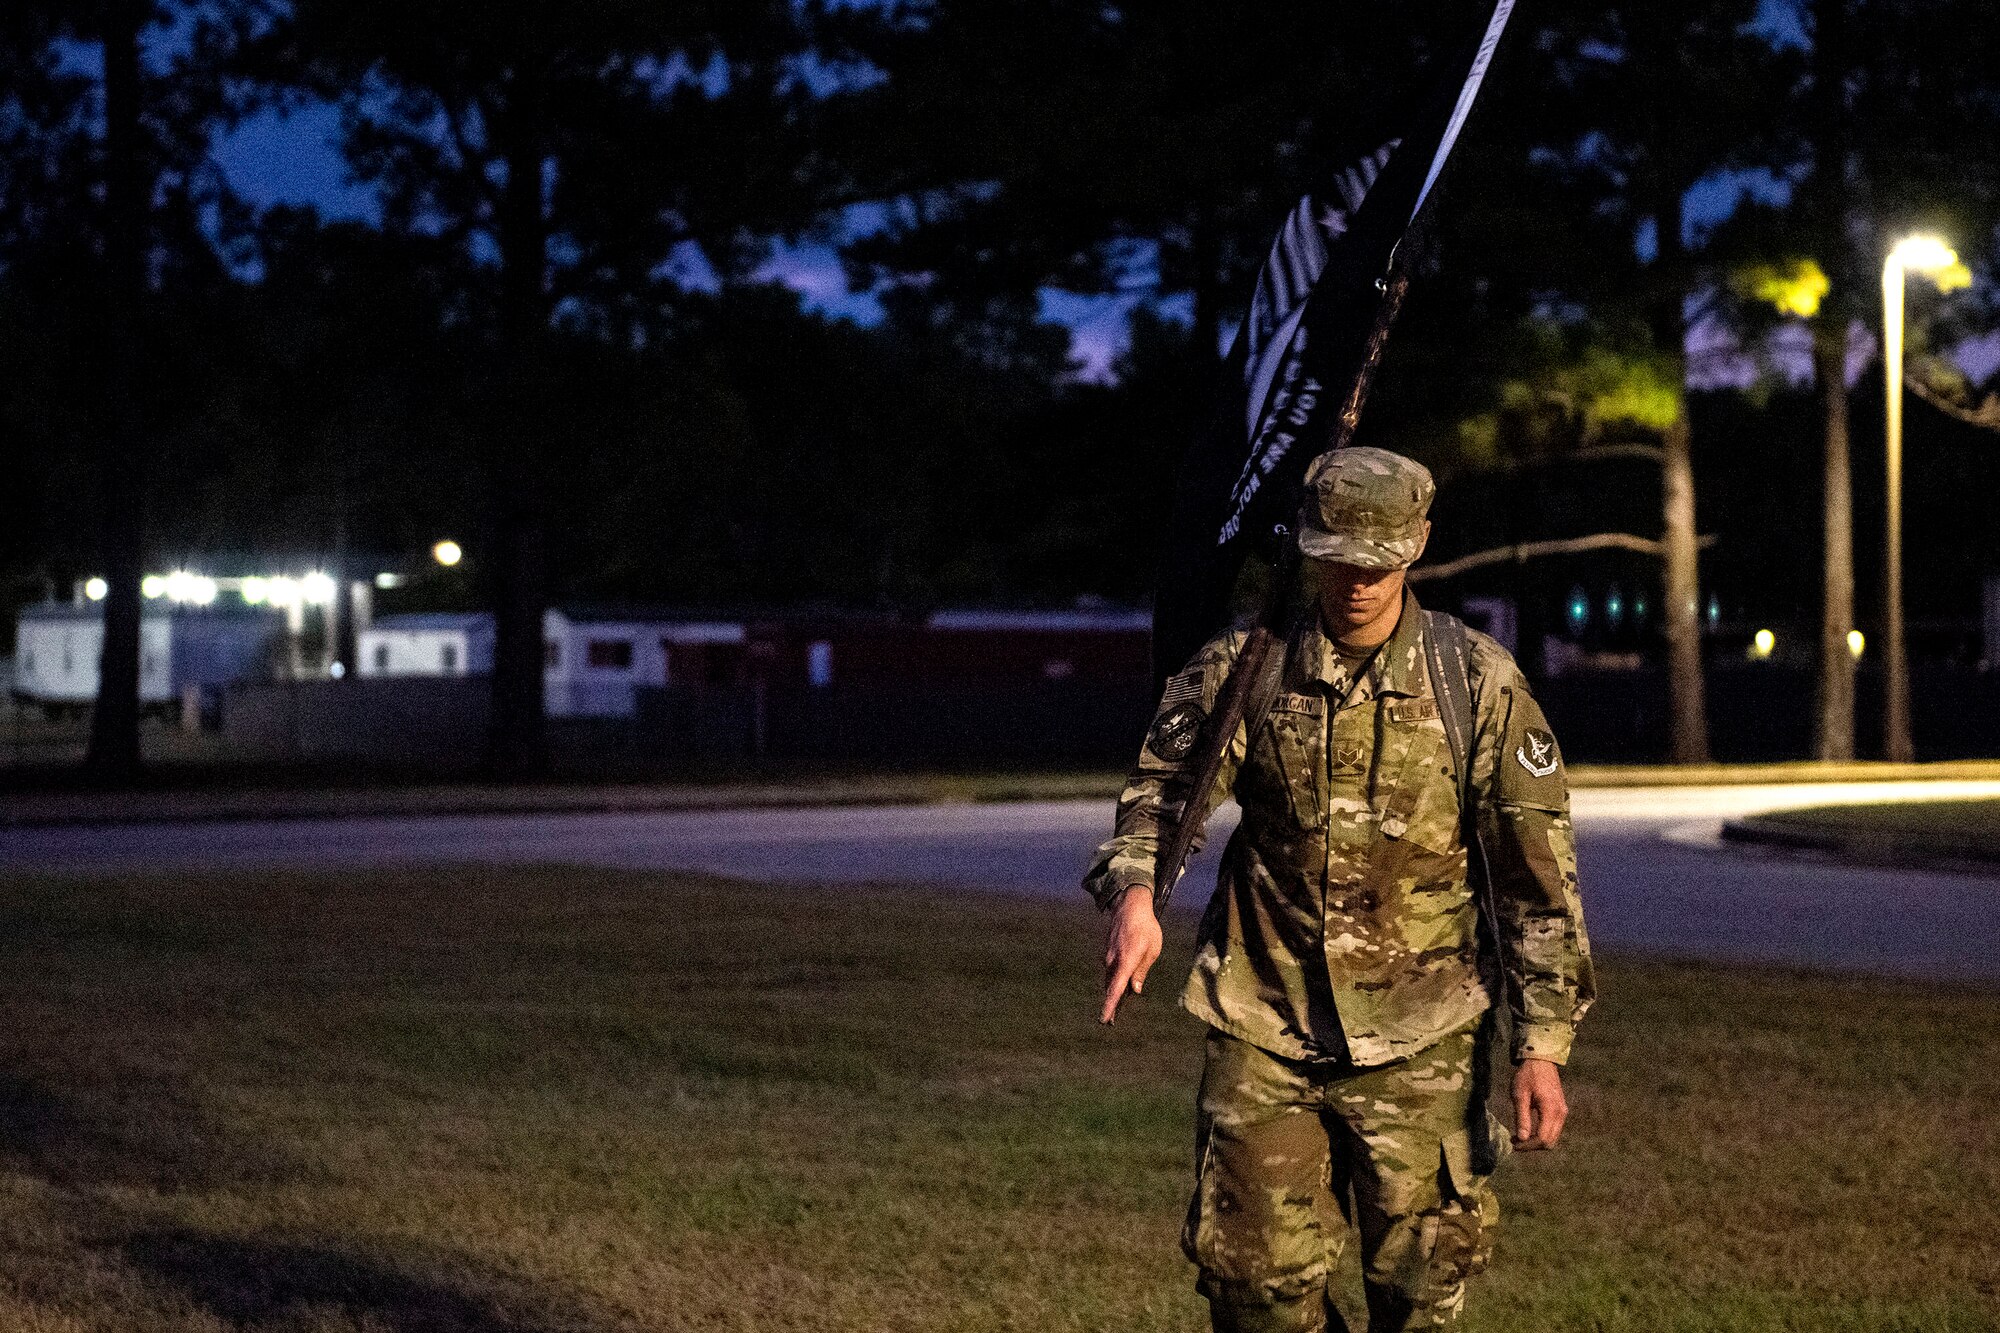 Staff Sgt. Michael Morgan, 23d Maintenance Squadron aerospace ground equipment craftsman, participates in the POW/MIA Recognition Day ruck march Sept. 20, 2019, at Moody Air Force Base, Ga. In 1979, the United States Congress passed a resolution authorizing National POW/MIA Recognition Day to be observed together with the national effort of bringing isolated personnel home. The 347th Operations Support Squadron hosted the 24-hour ruck march to pay tribute to those who’ve been captured or missing in the line of duty. (U.S. Air Force photo by Senior Airman Erick Requadt)